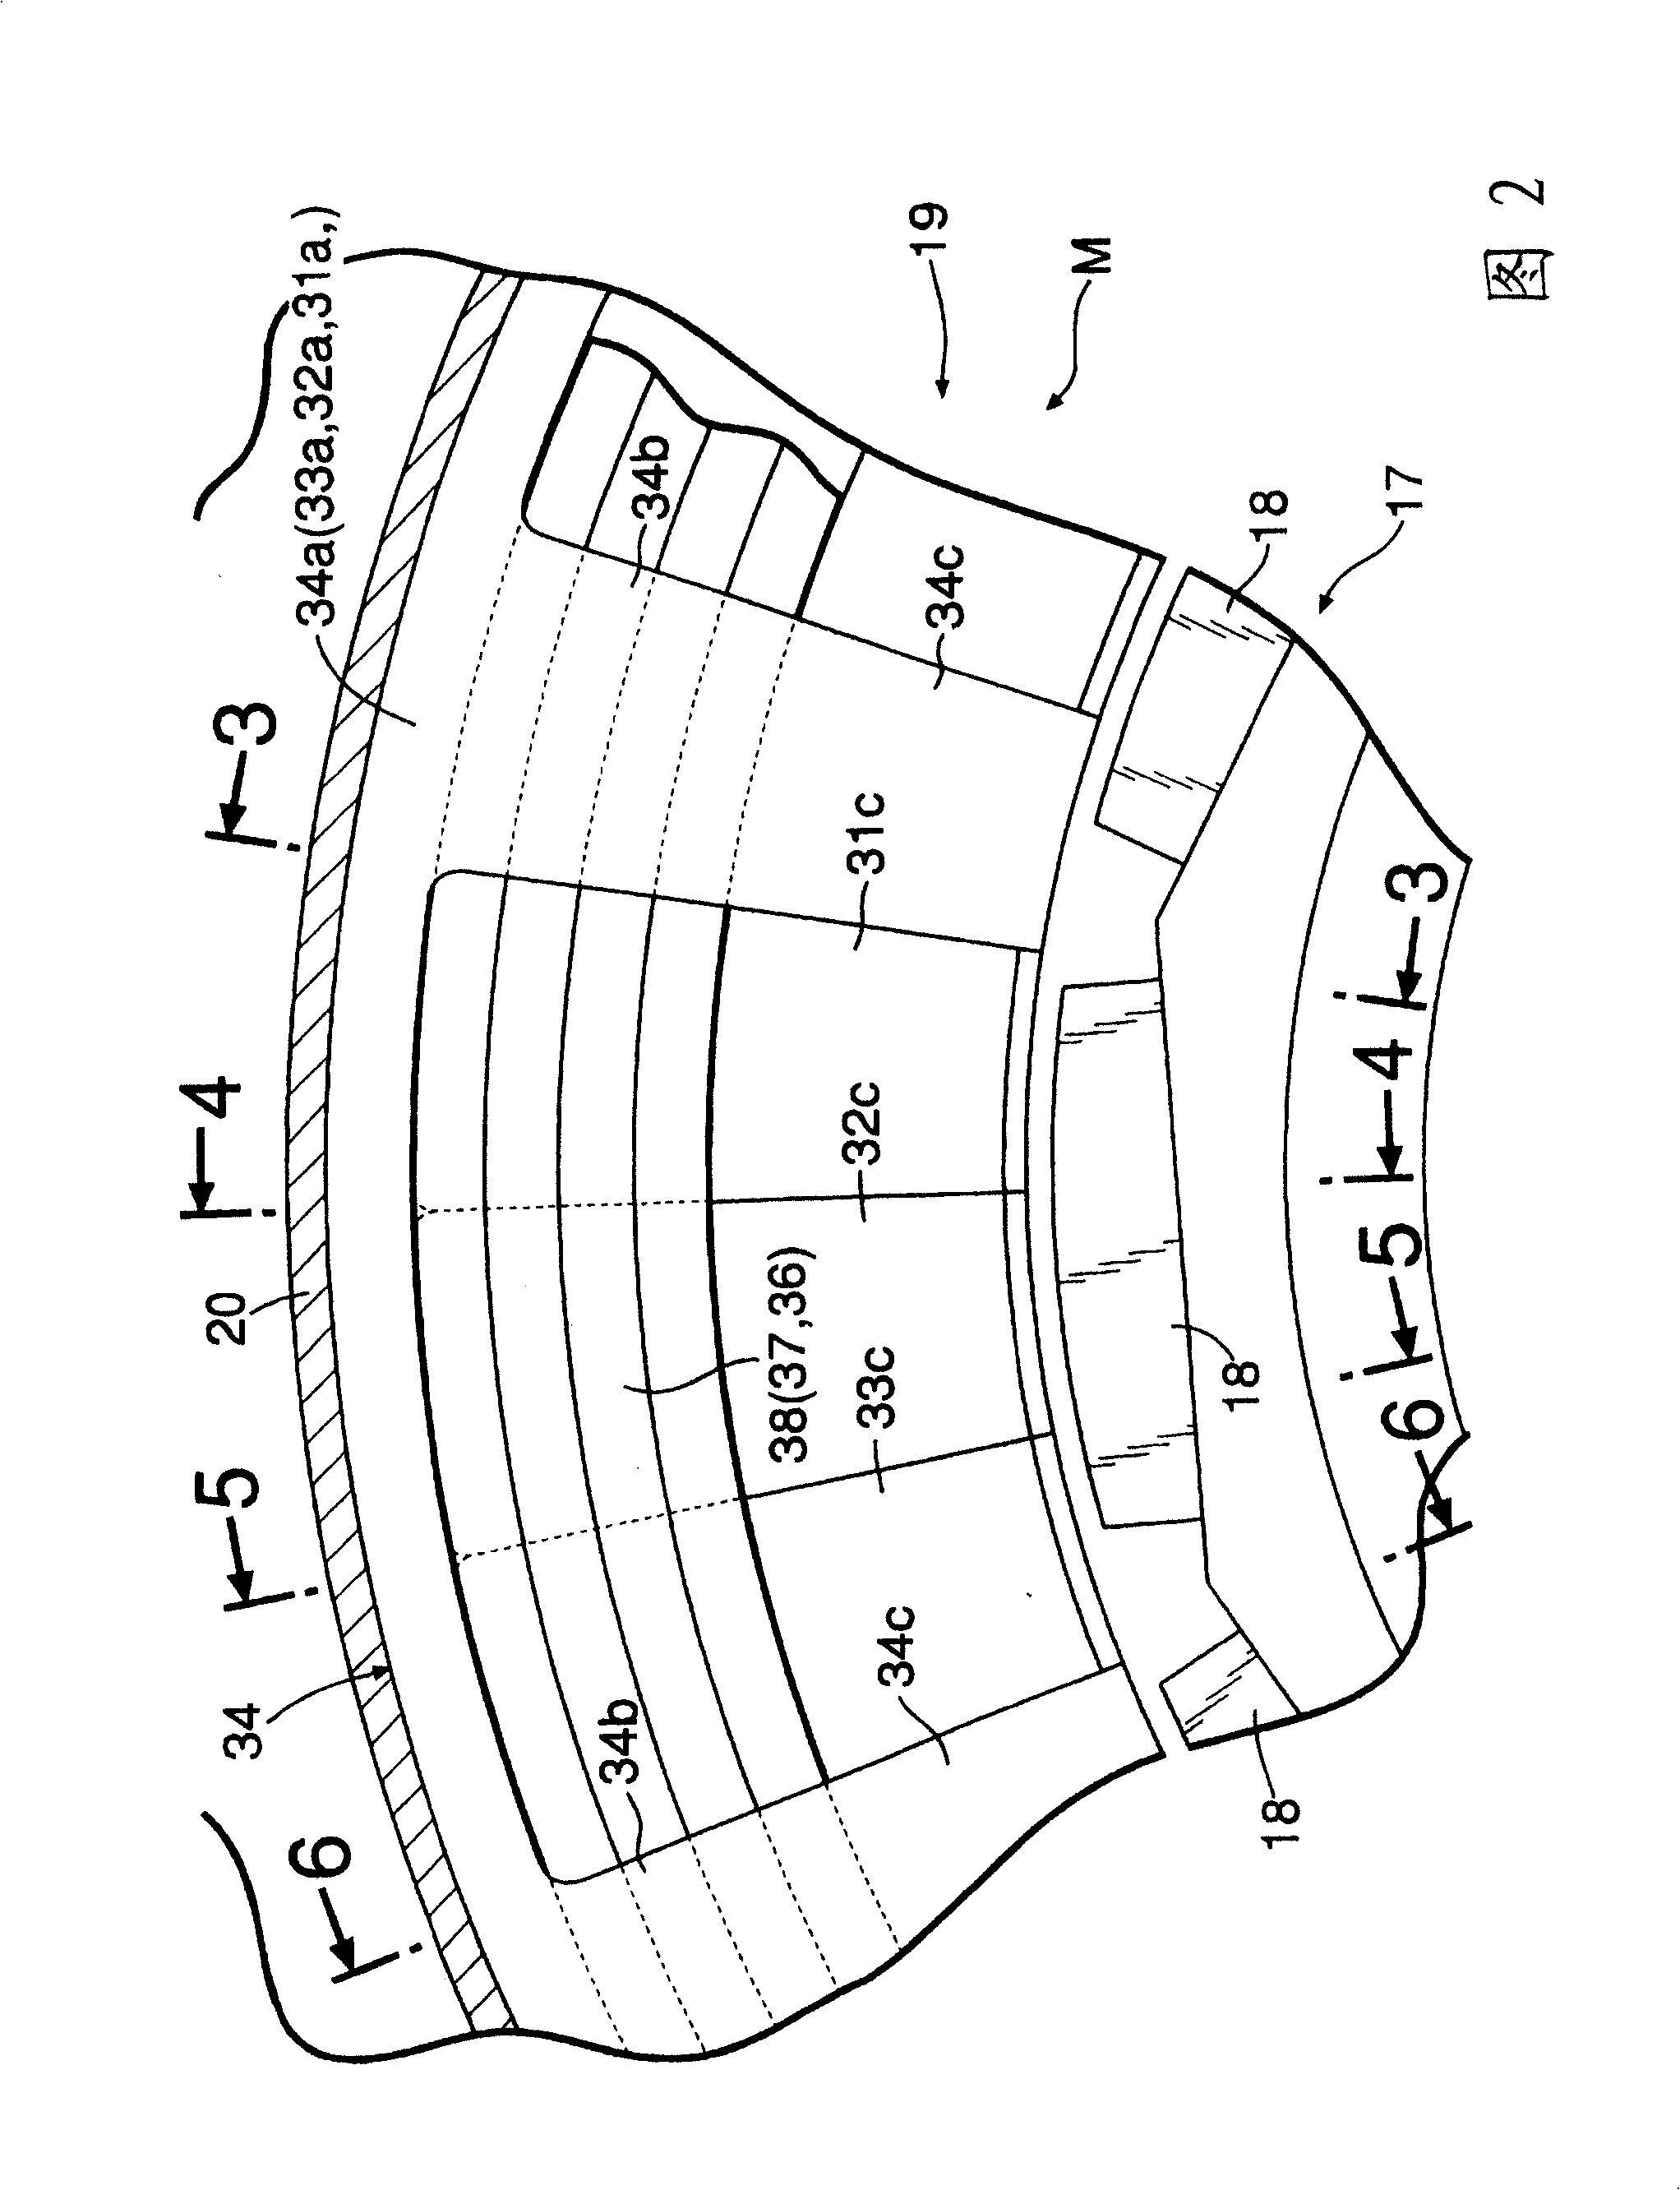 Stator of claw-pole shaped motor